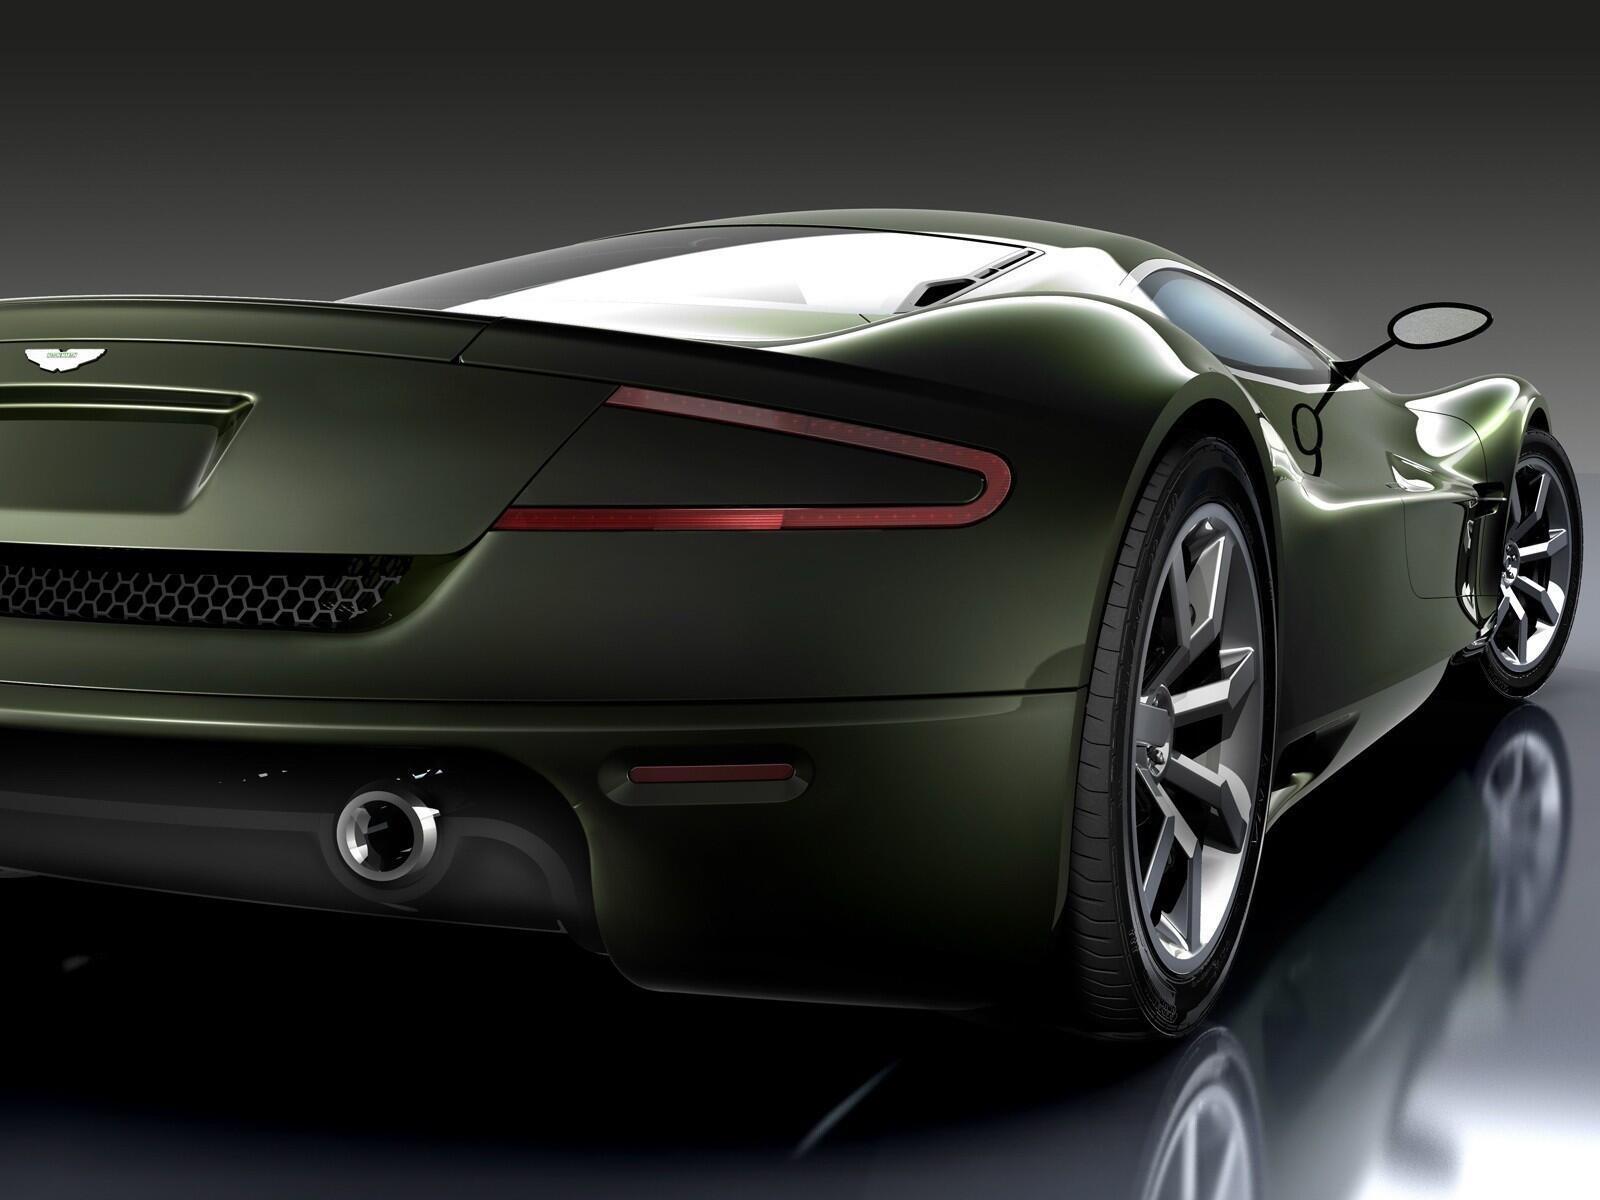 Wallpapers aston martin new coupe on the desktop